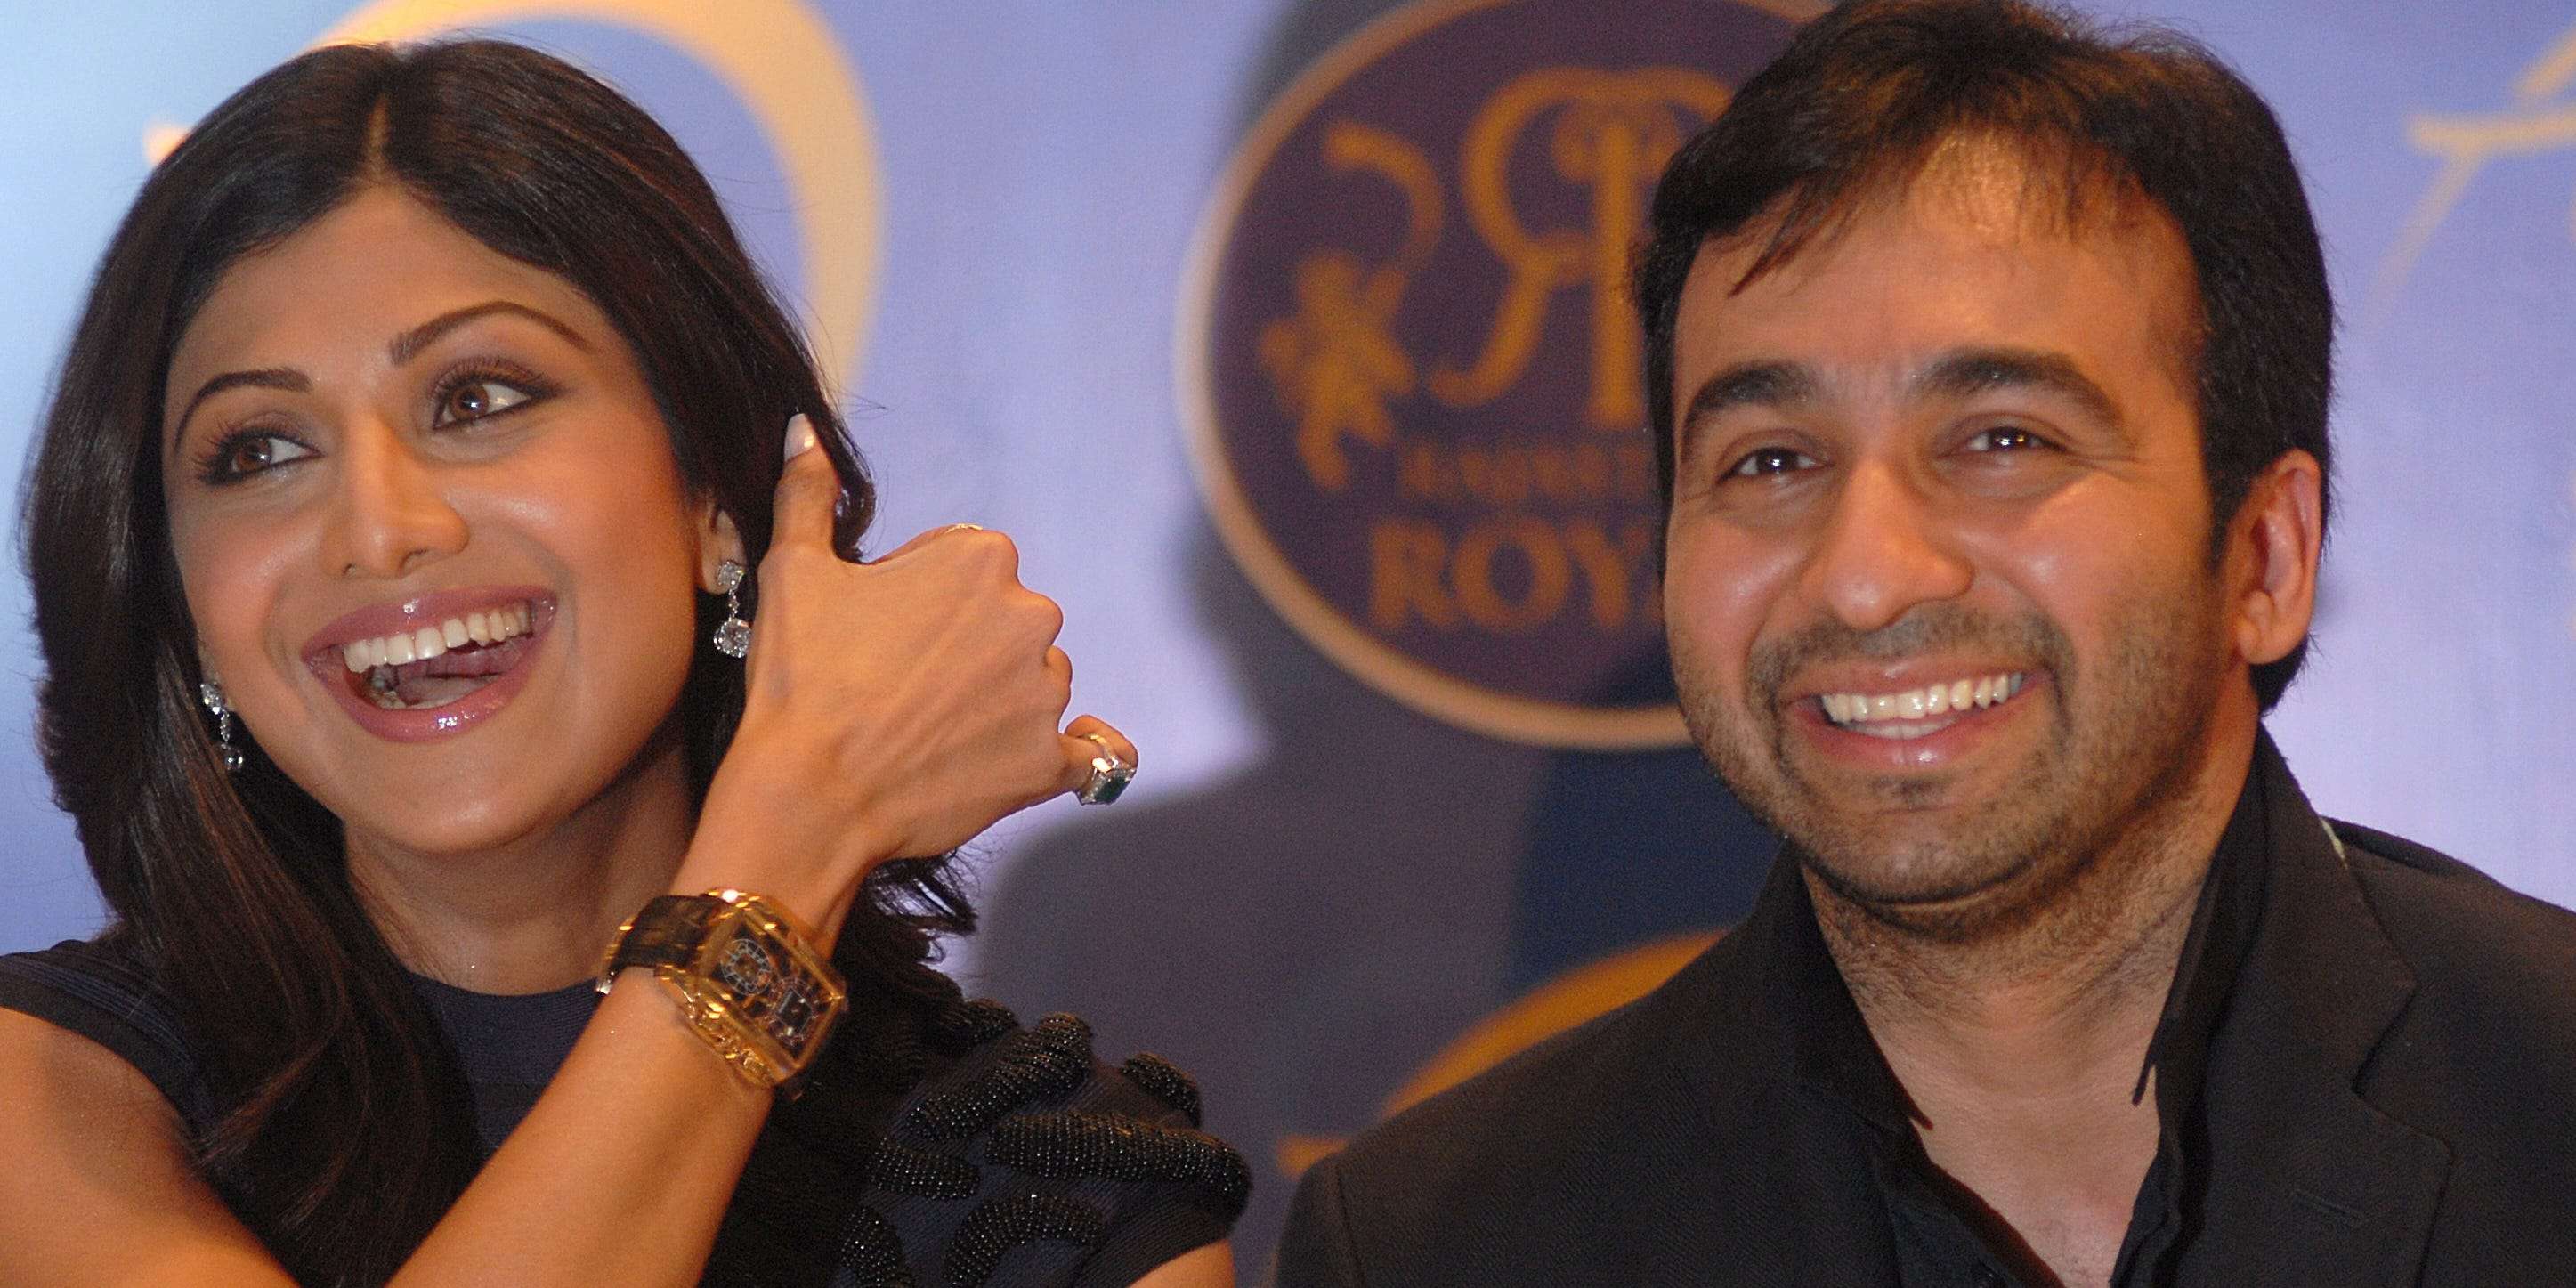 Millionaire married to Bollywood star is investigated for involvement in porn ring that coerced women into sex videos Business Insider India picture pic